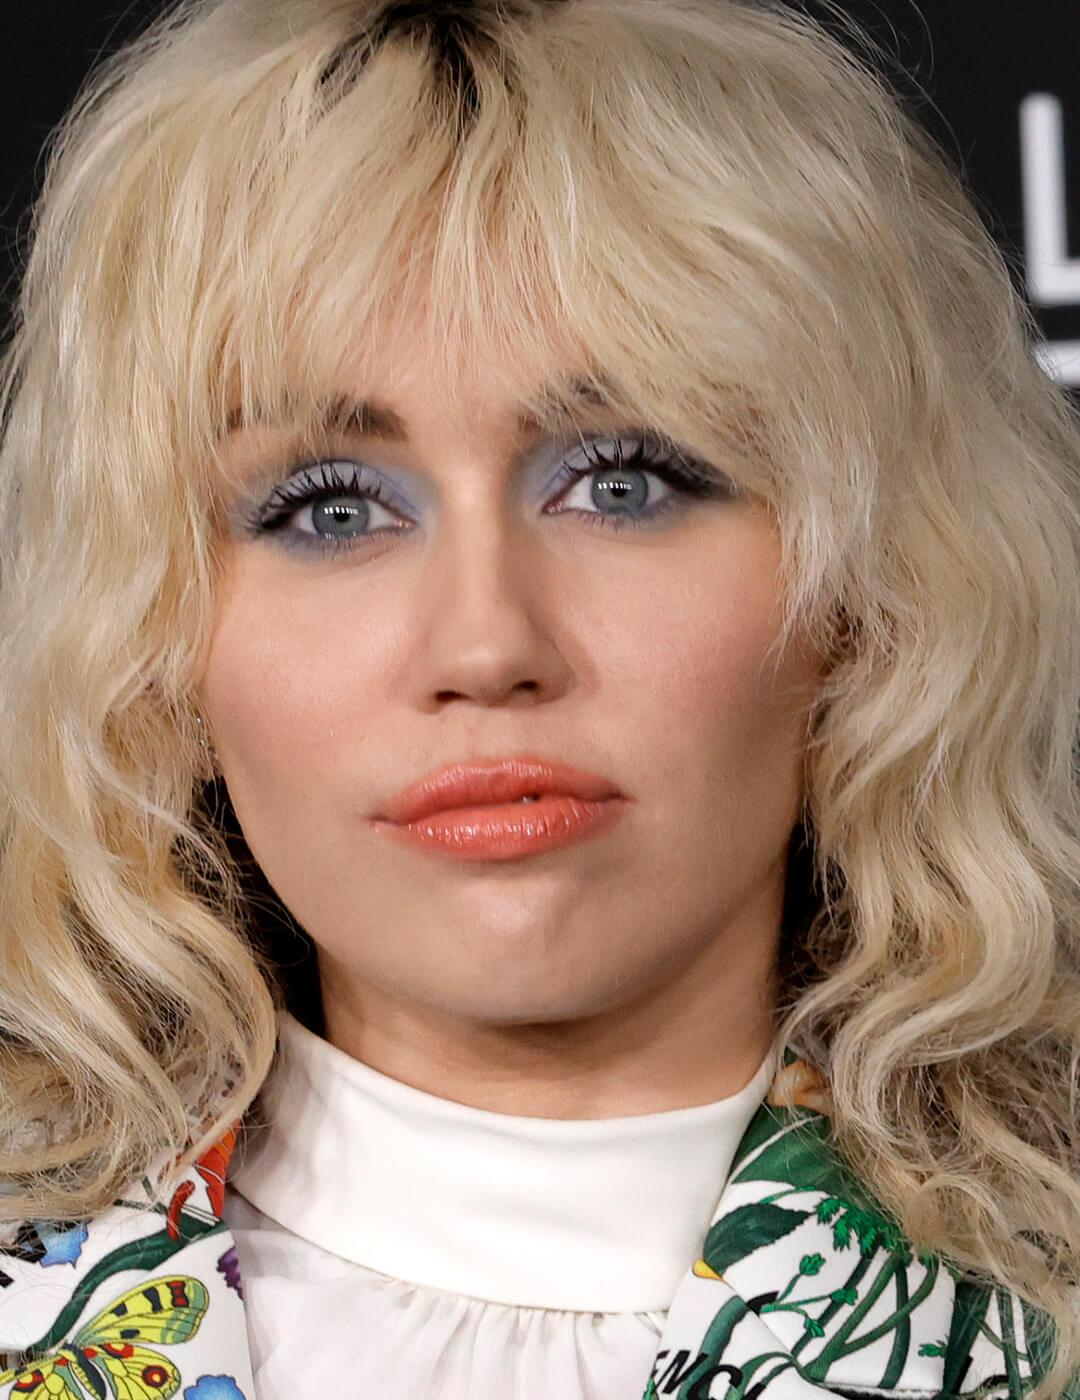 Miley Cyrus rocking pastel blue eyeshadow and warm peach lipstick on the red carpet